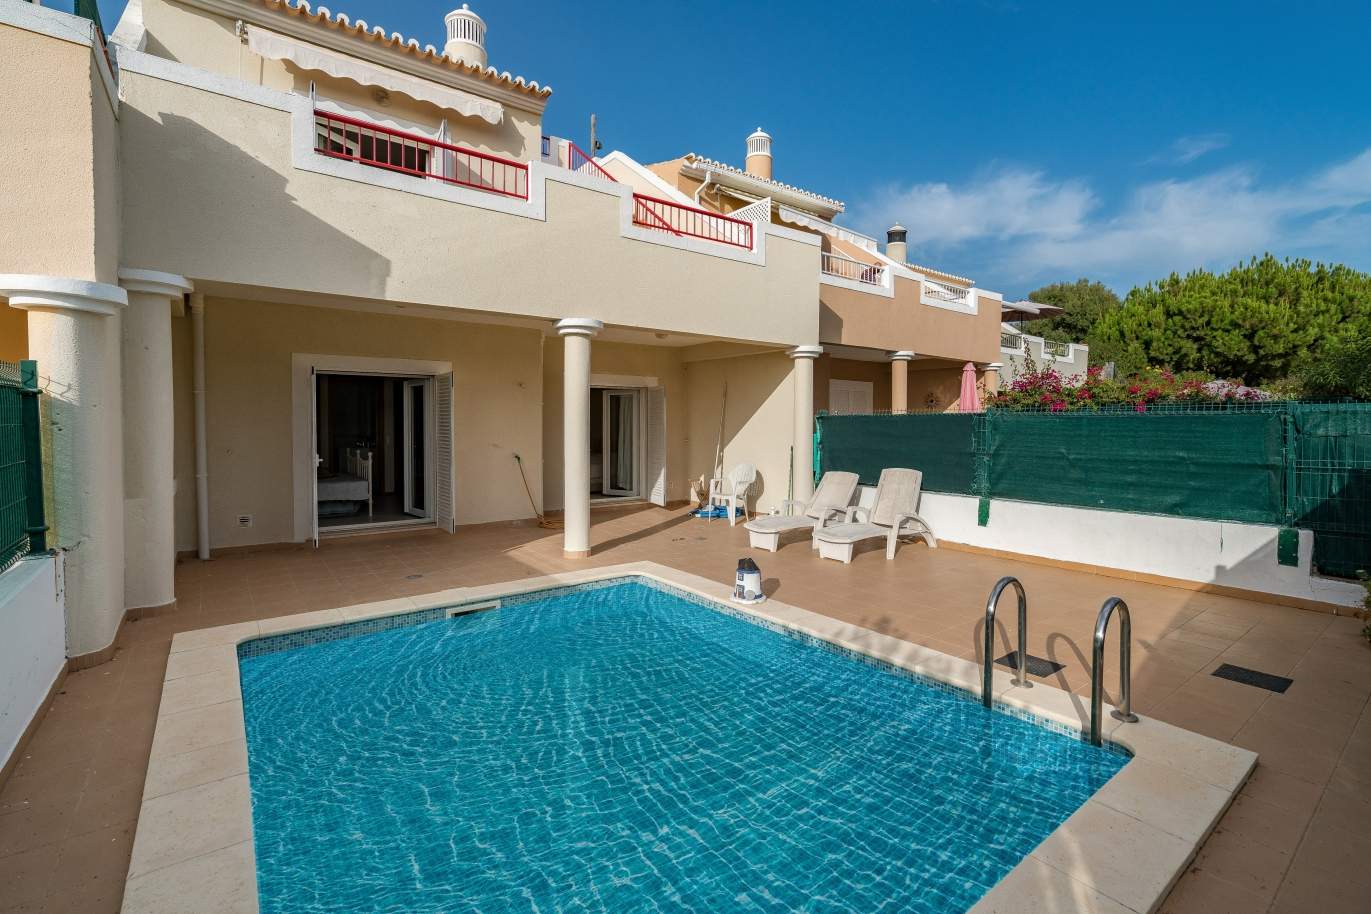 Villa with 2 bedrooms, pool and sea view, for sale, Carvoeiro, Algarve_149485